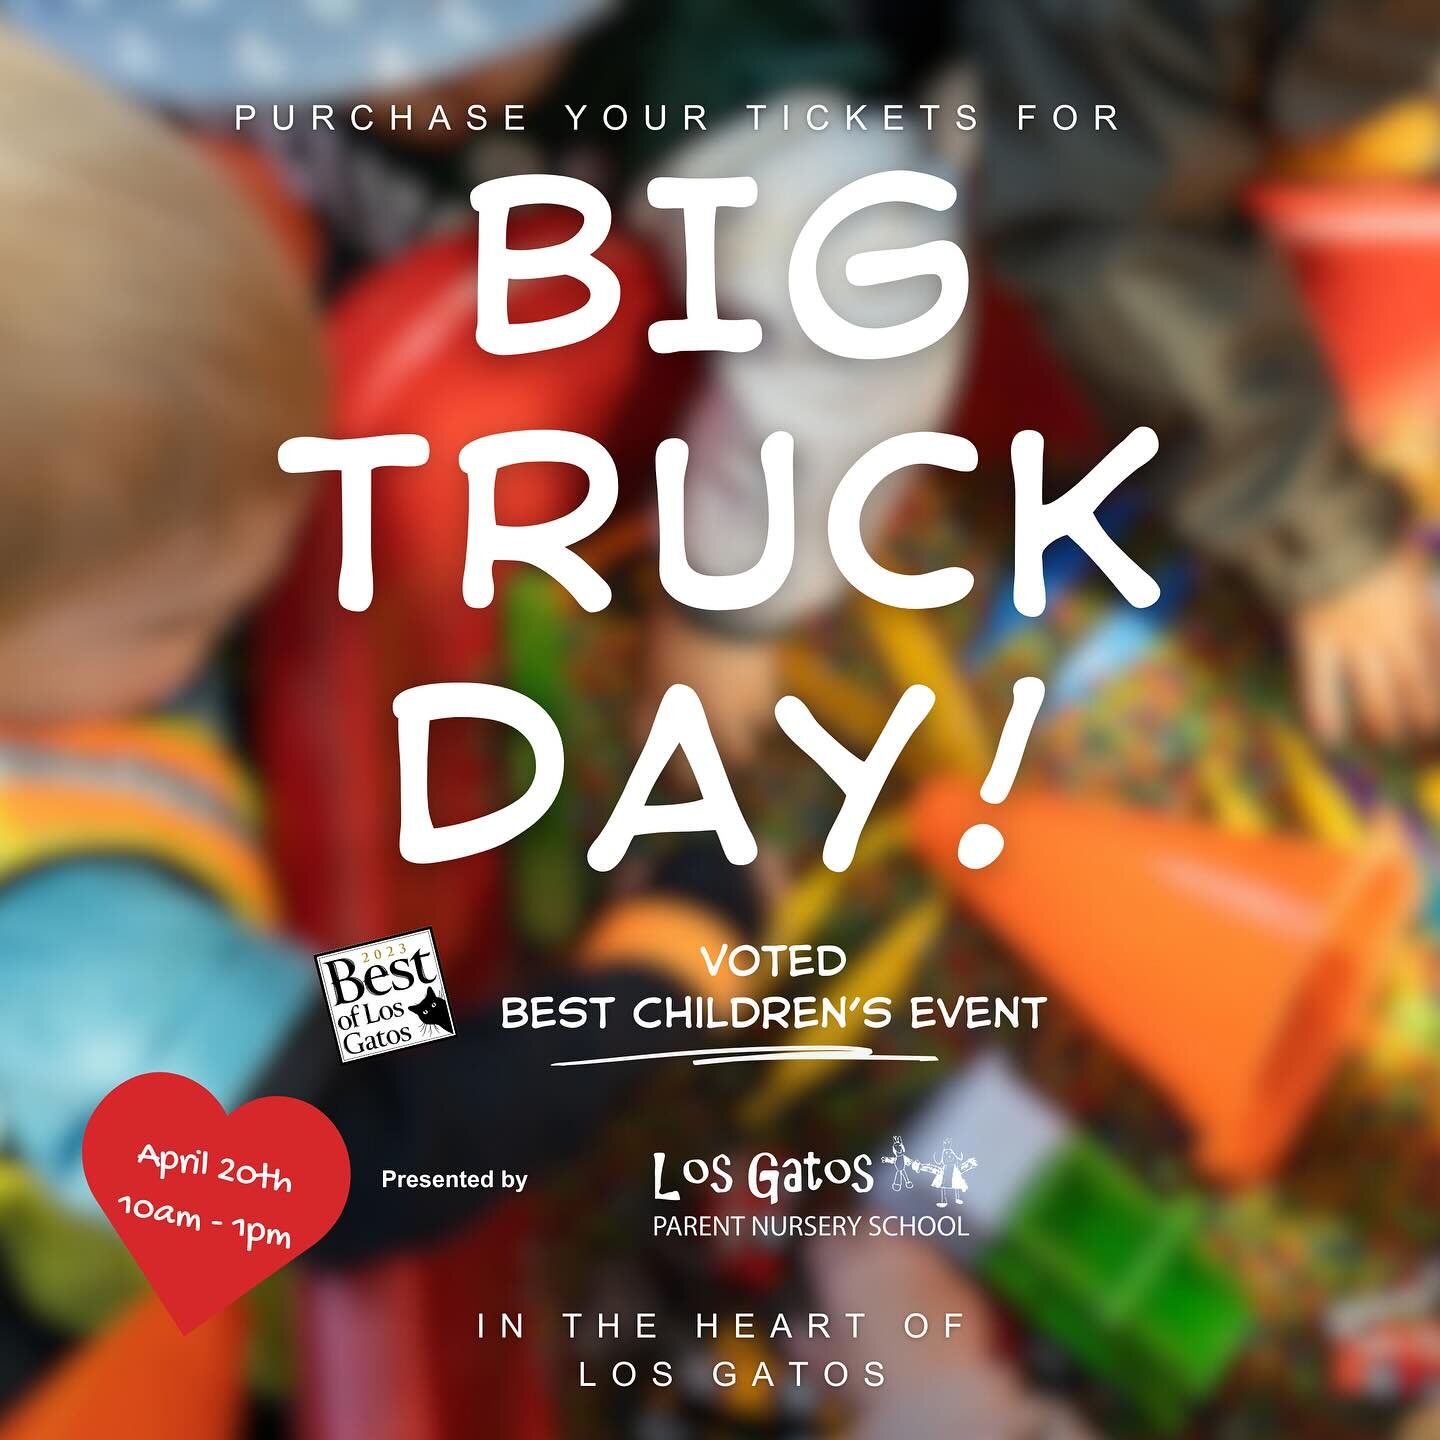 🚚 Get ready for the 2nd annual LGPNS Big Truck Day on April 20th! 🚑

Don&rsquo;t miss out on the @sanjosefirefighters Shark Engine, @lakeshorelearning booth, @sanjosesharks Street Team, and yummy treats from various food trucks! Plus, tons of truck